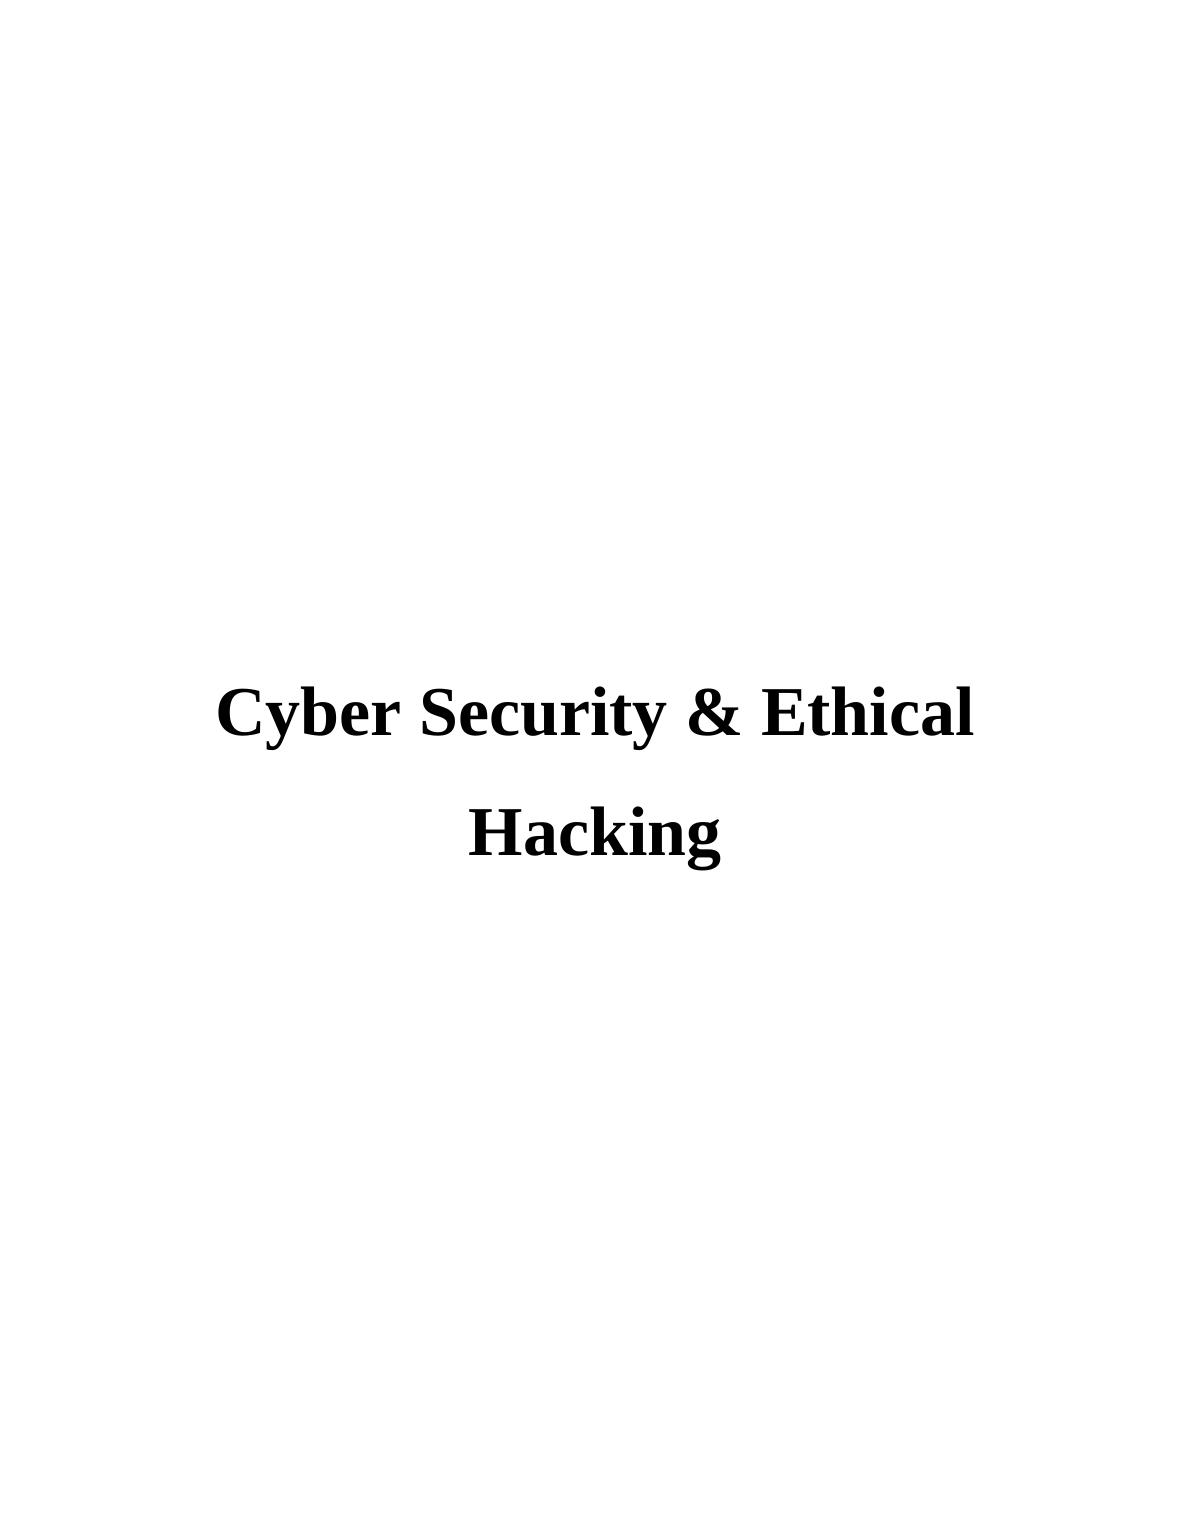 Cyber Security & Ethical Hacking : Report_1